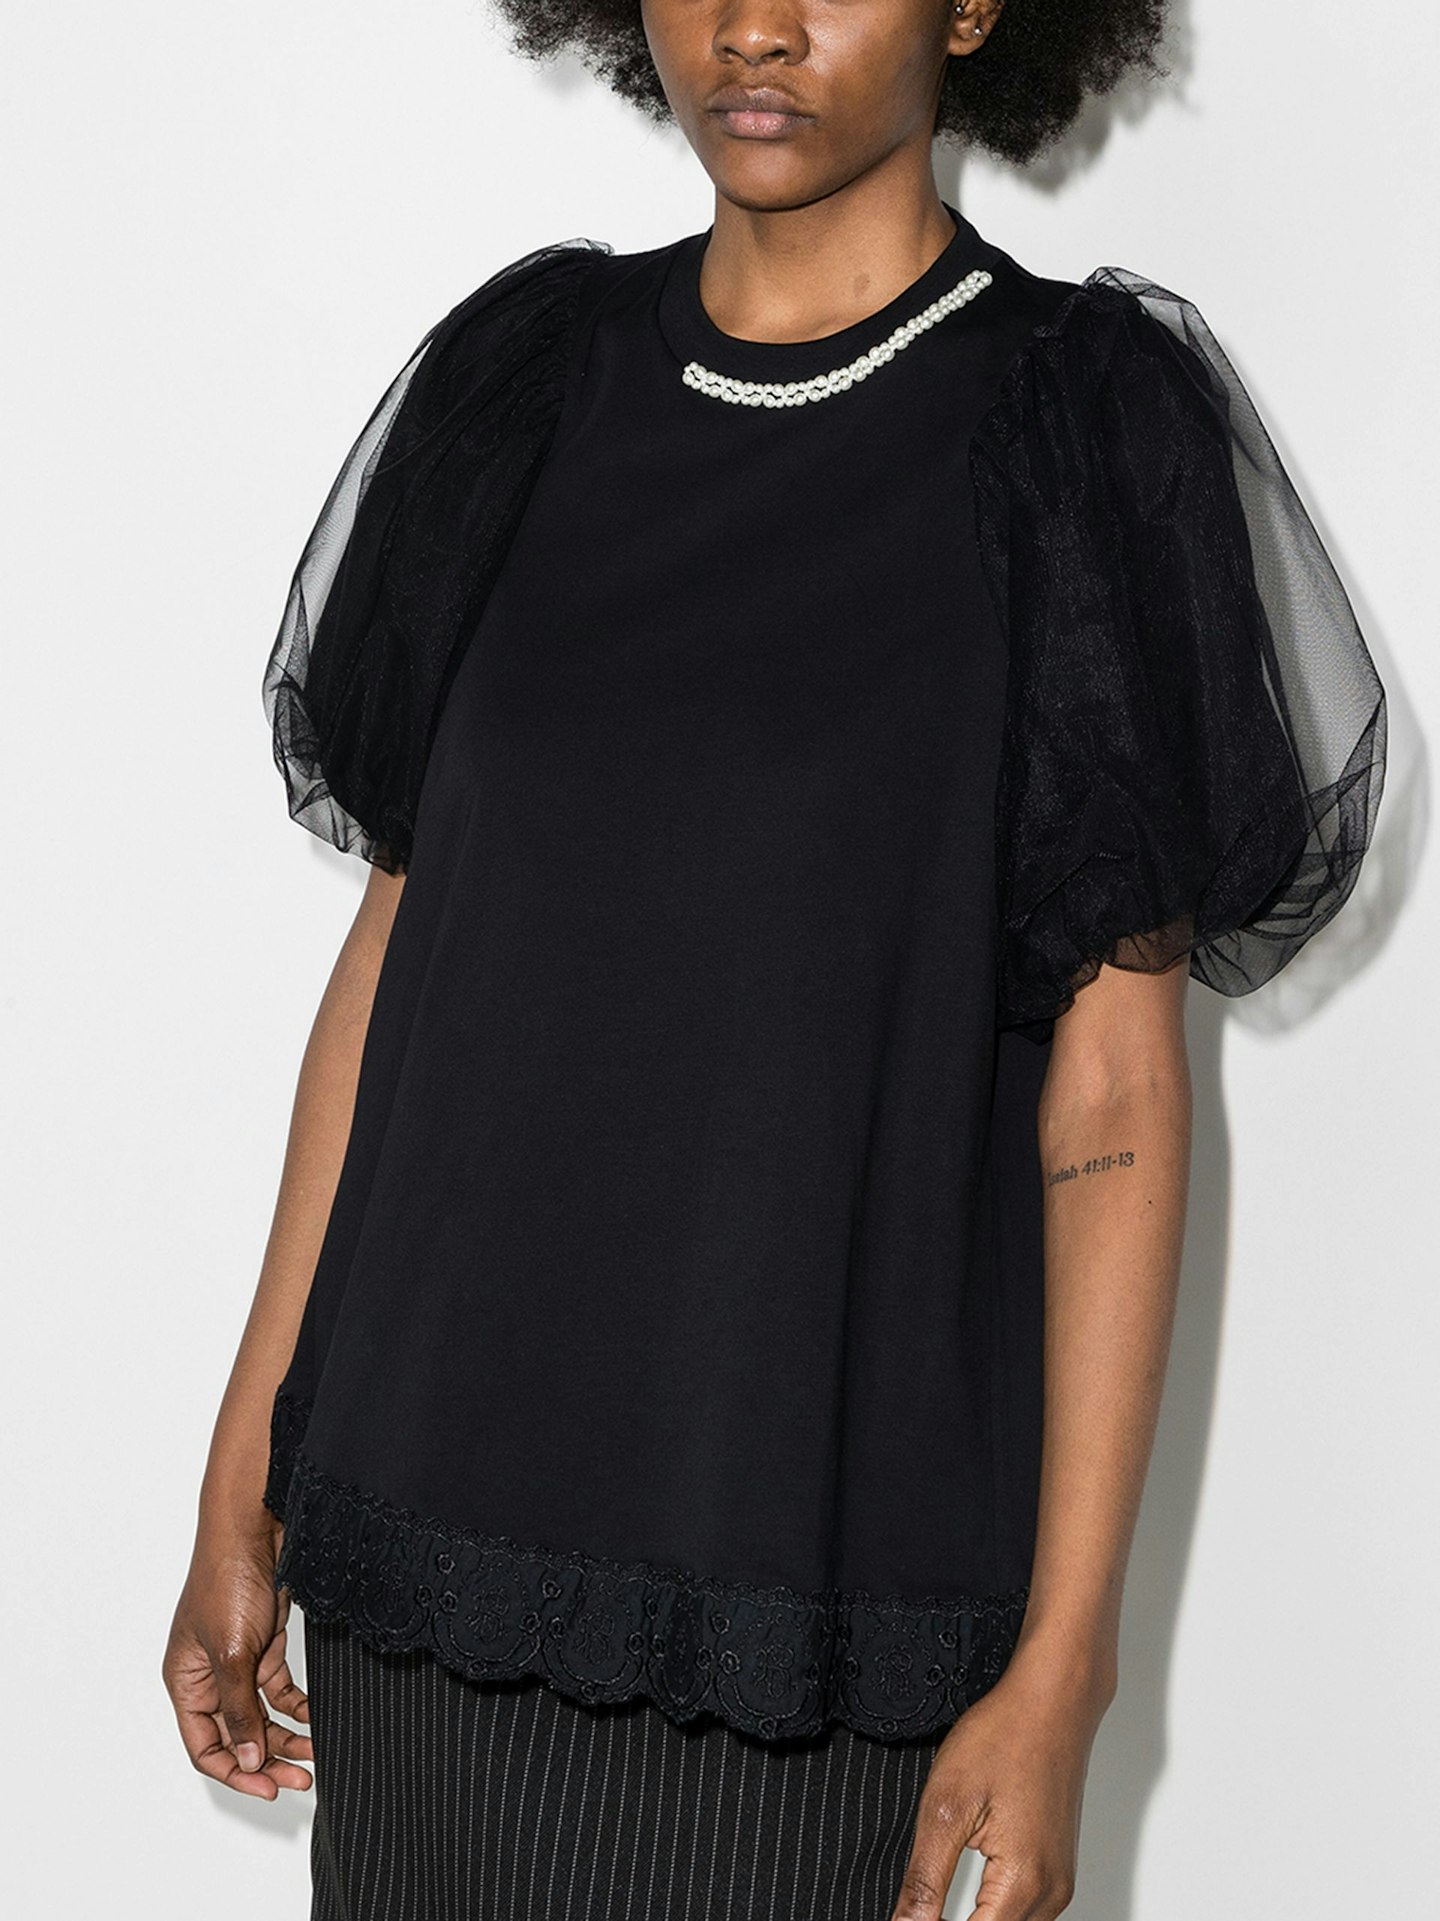 Simone Rocha, Layered Tulle T-Shirt, £345 at Browns